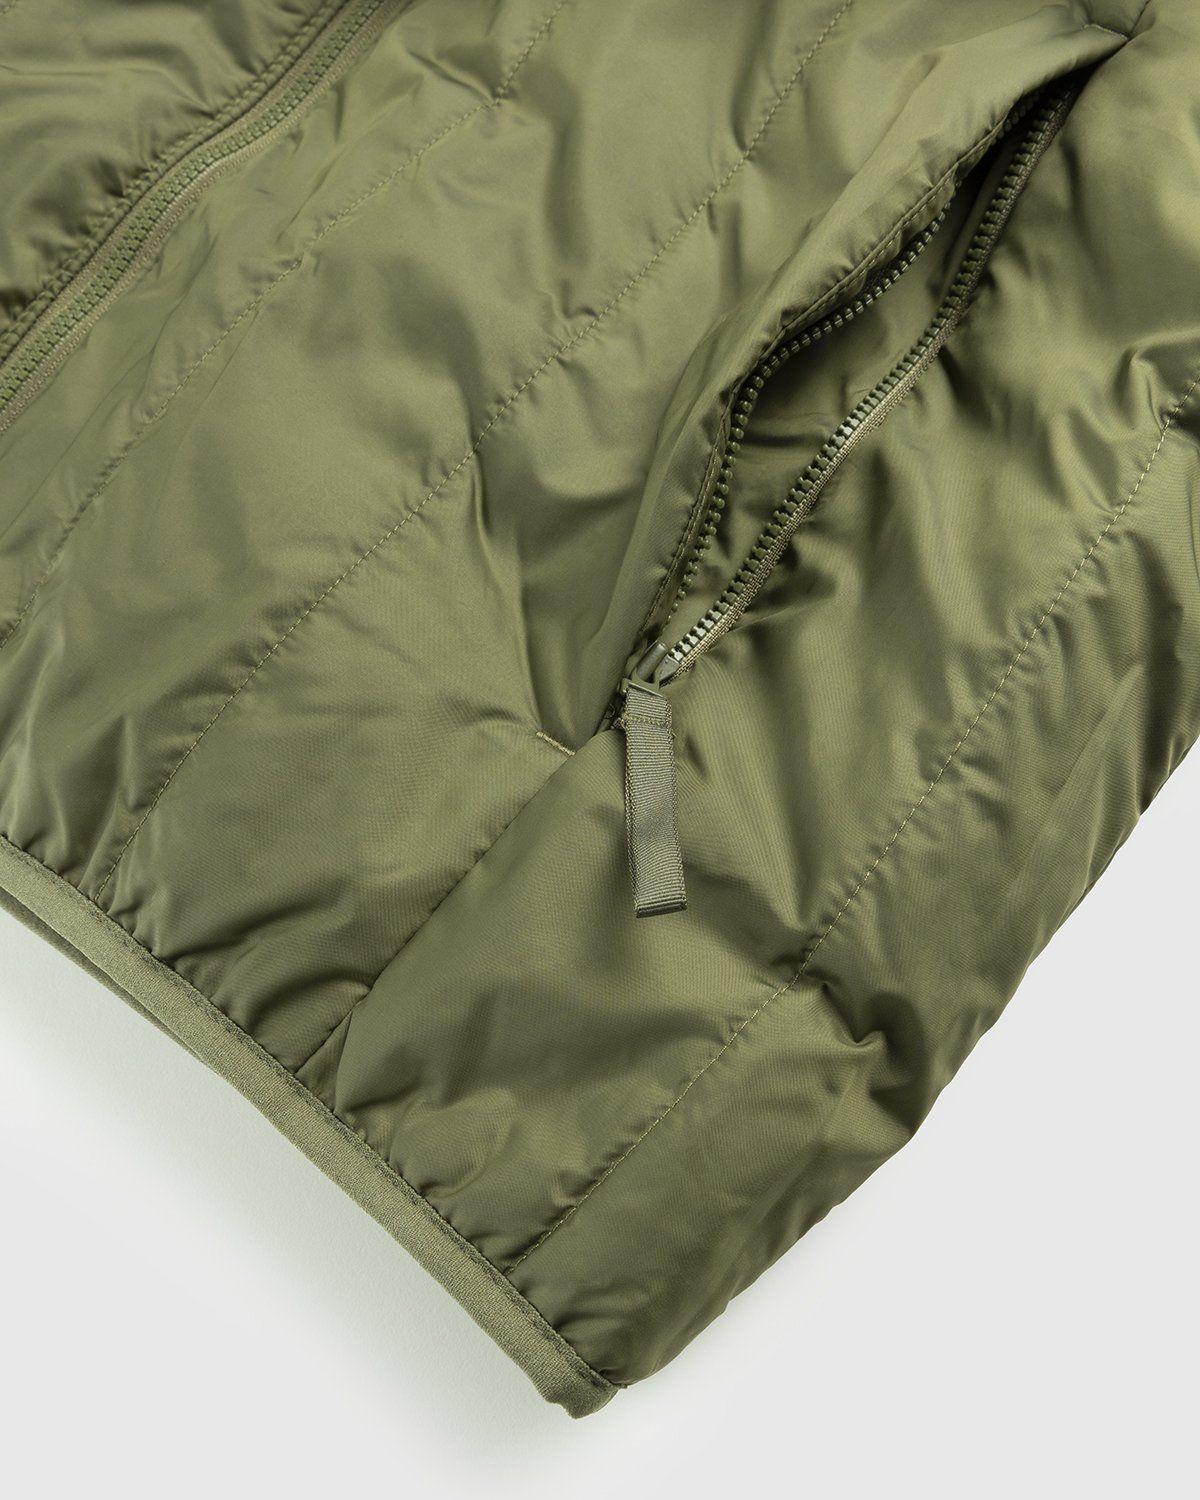 Adidas – Itavic 3-Stripes Midweight Hooded Jacket Olive - Outerwear - Green - Image 6